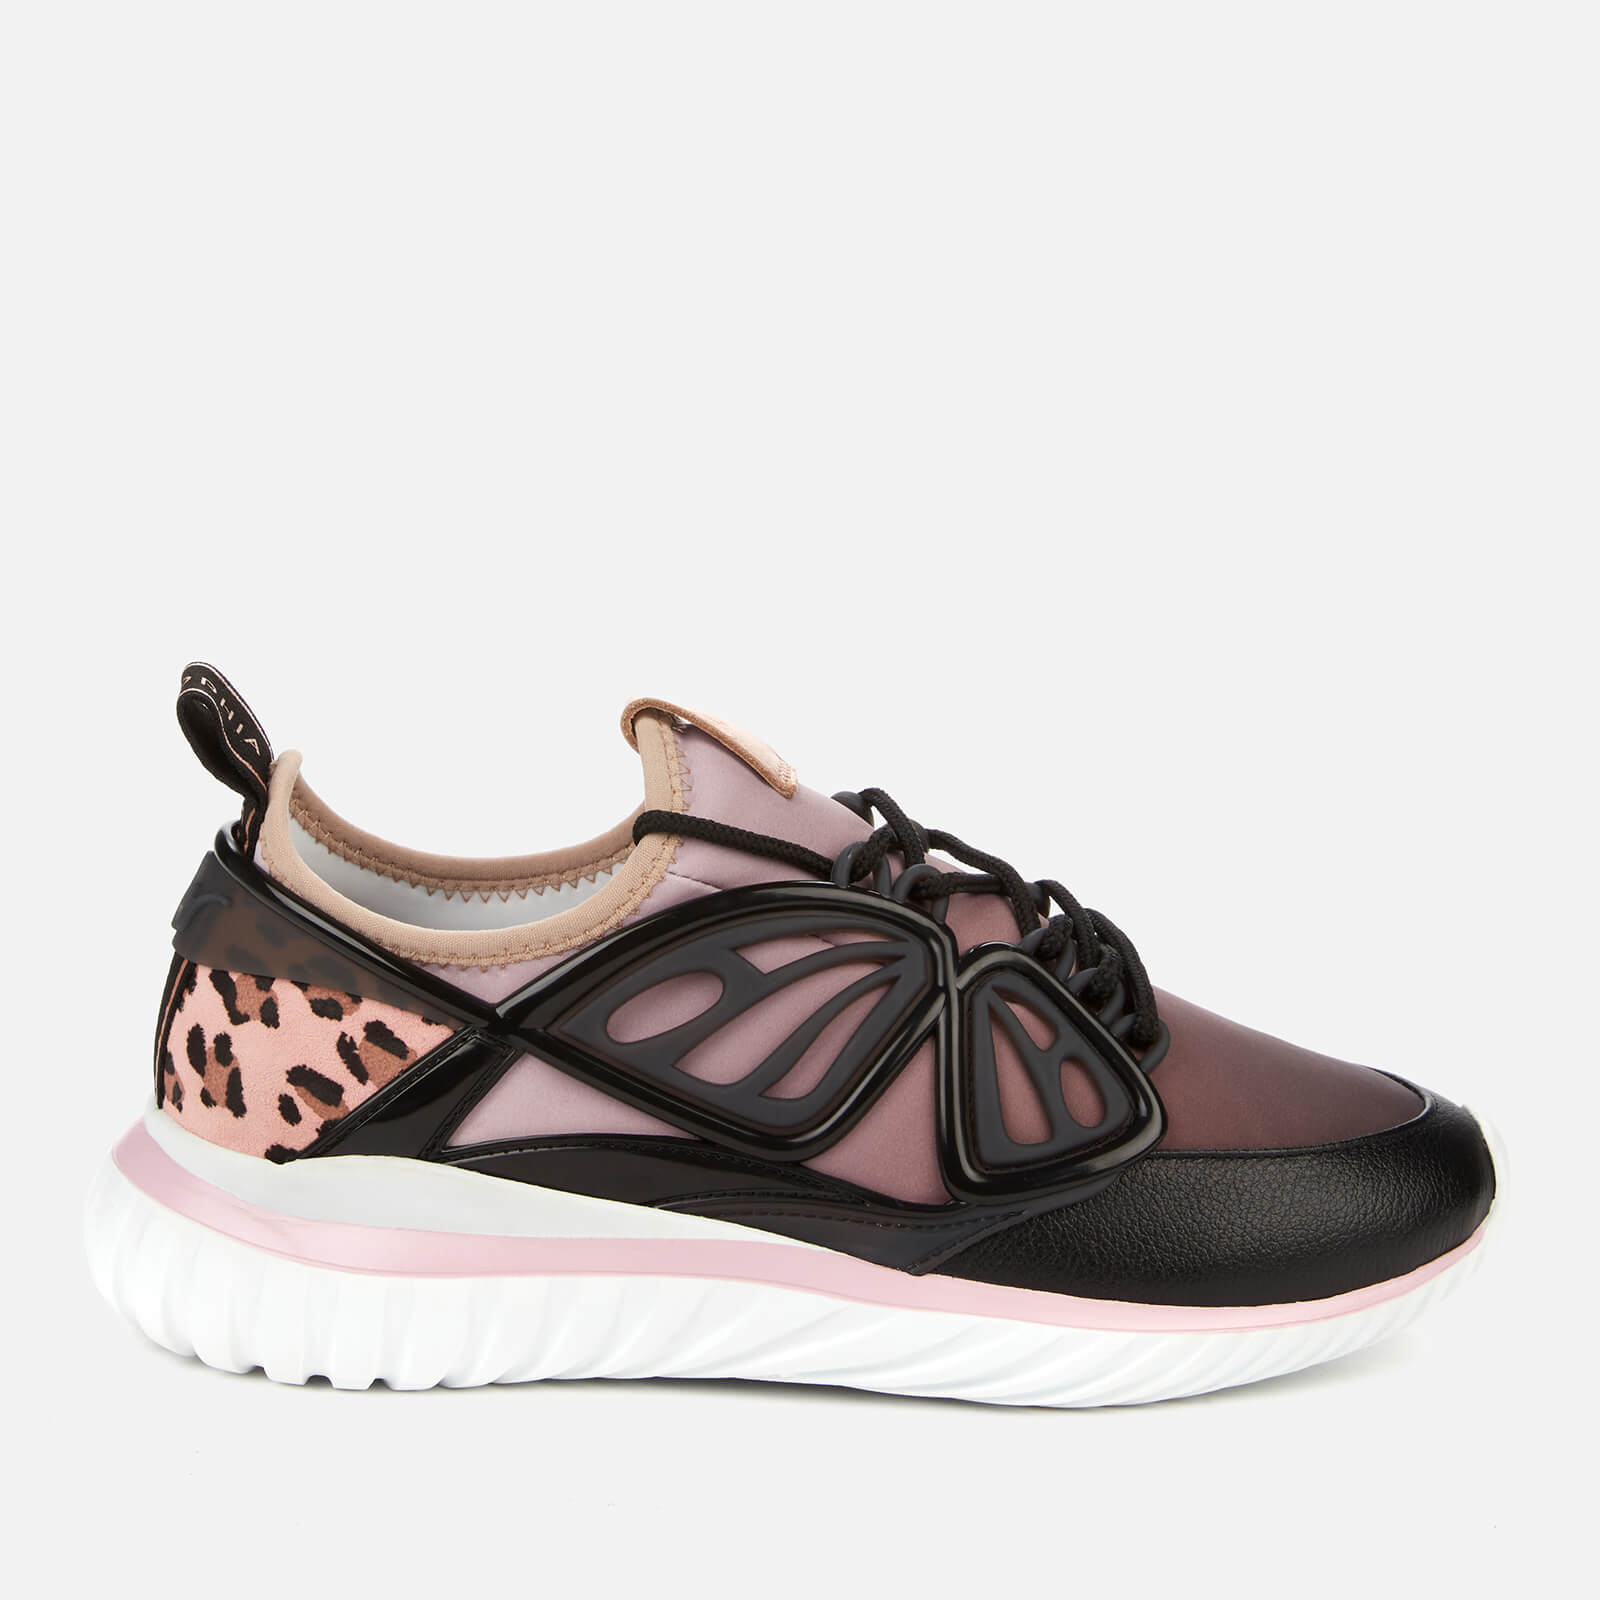 Sophia Webster Women's Fly-By Running Style Trainers - Black/Pink - UK 3